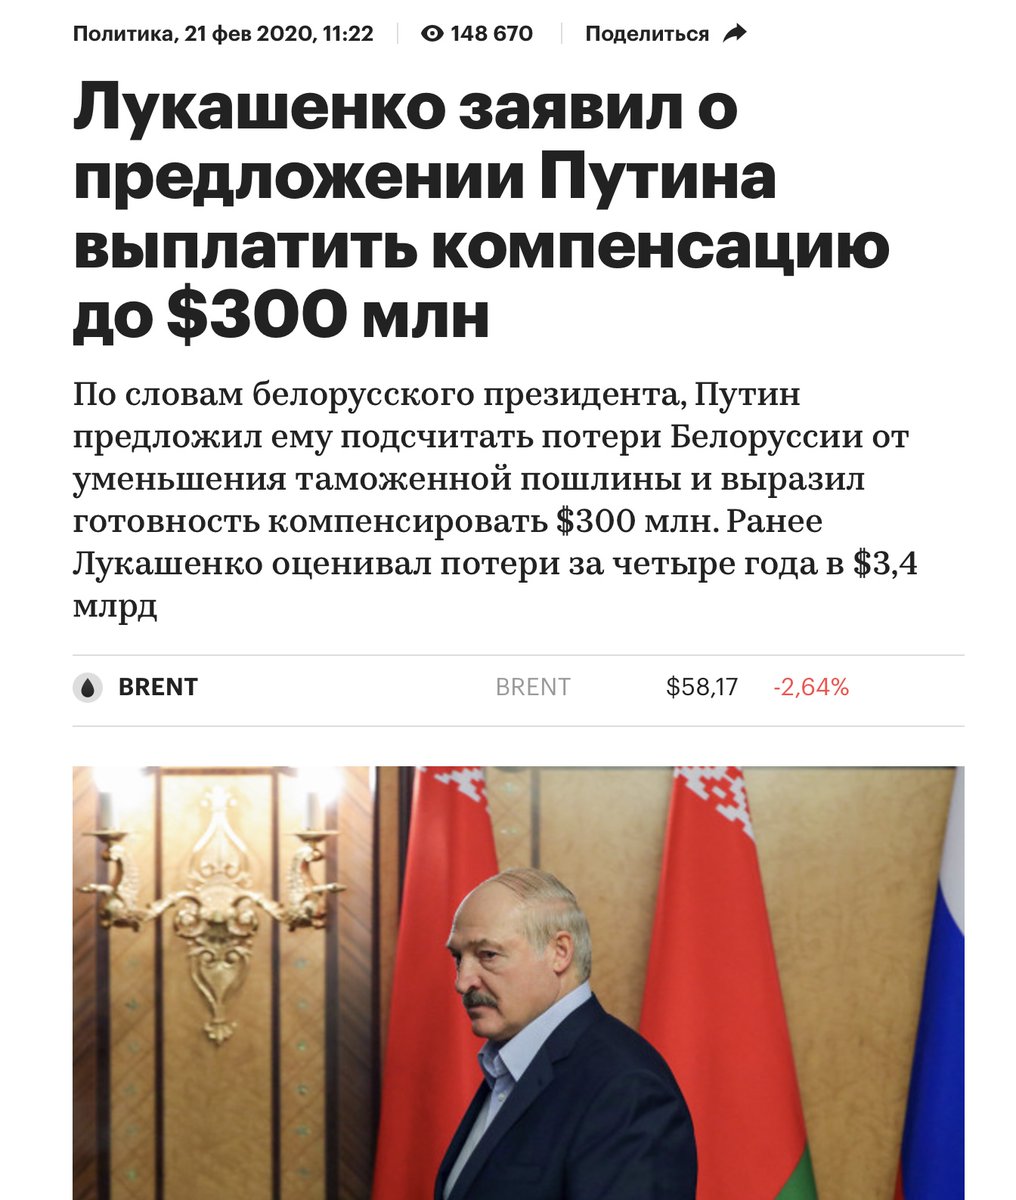 And yet, in 2015 Russia started a "tax manoeuvre" aiming to reduce oil export custom duties to zero. Lukashenko demanded a compensation of 3,4 billion dollars. According to RBC, Putin agreed to pay 300 million usd  https://www.rbc.ru/politics/21/02/2020/5e4f927c9a7947bb3070f865